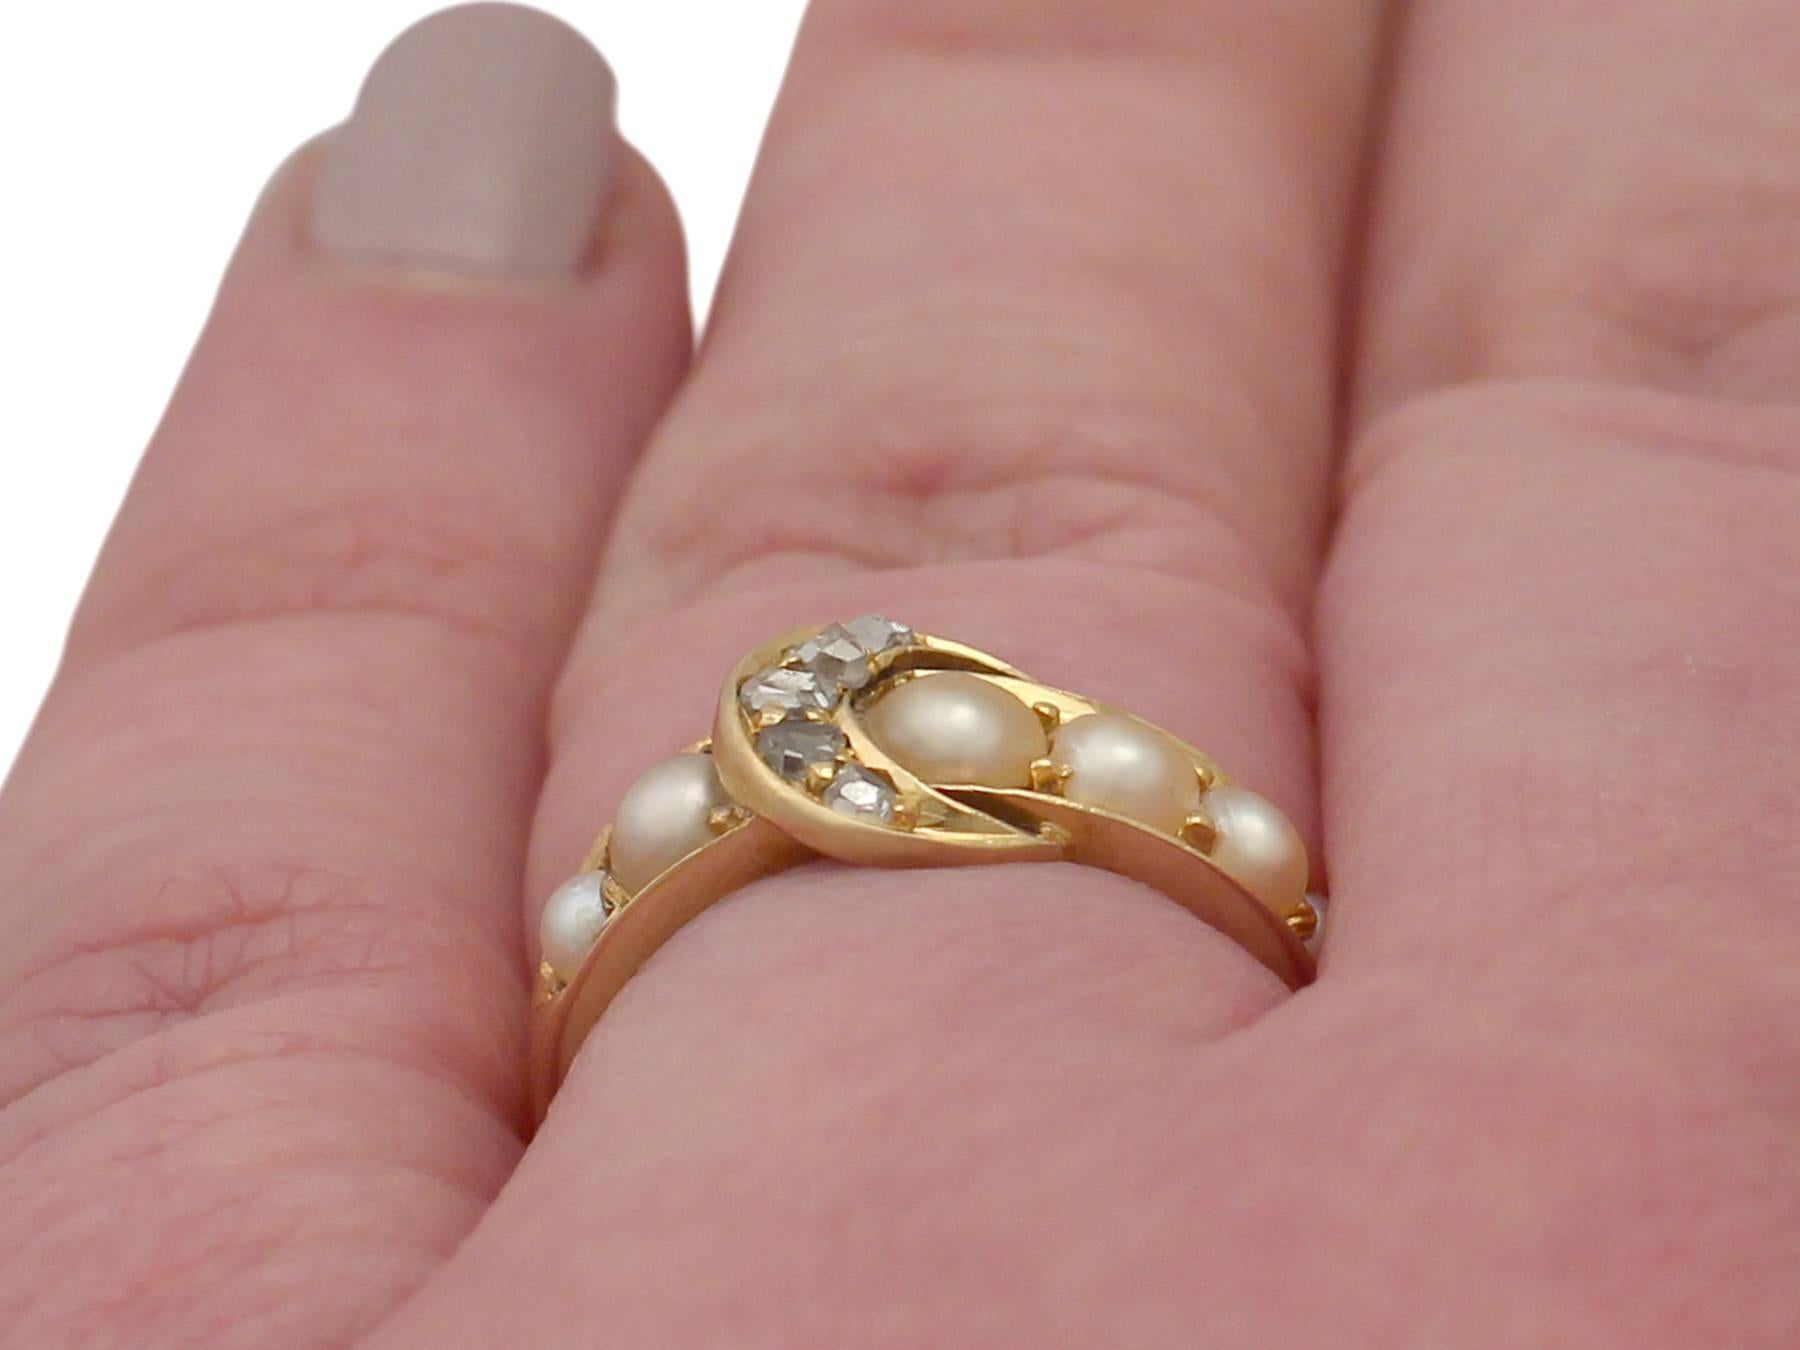 1910s 0.15 Carat Diamond and Pearl, 18 Carat Yellow Gold 'Buckle' Ring 4